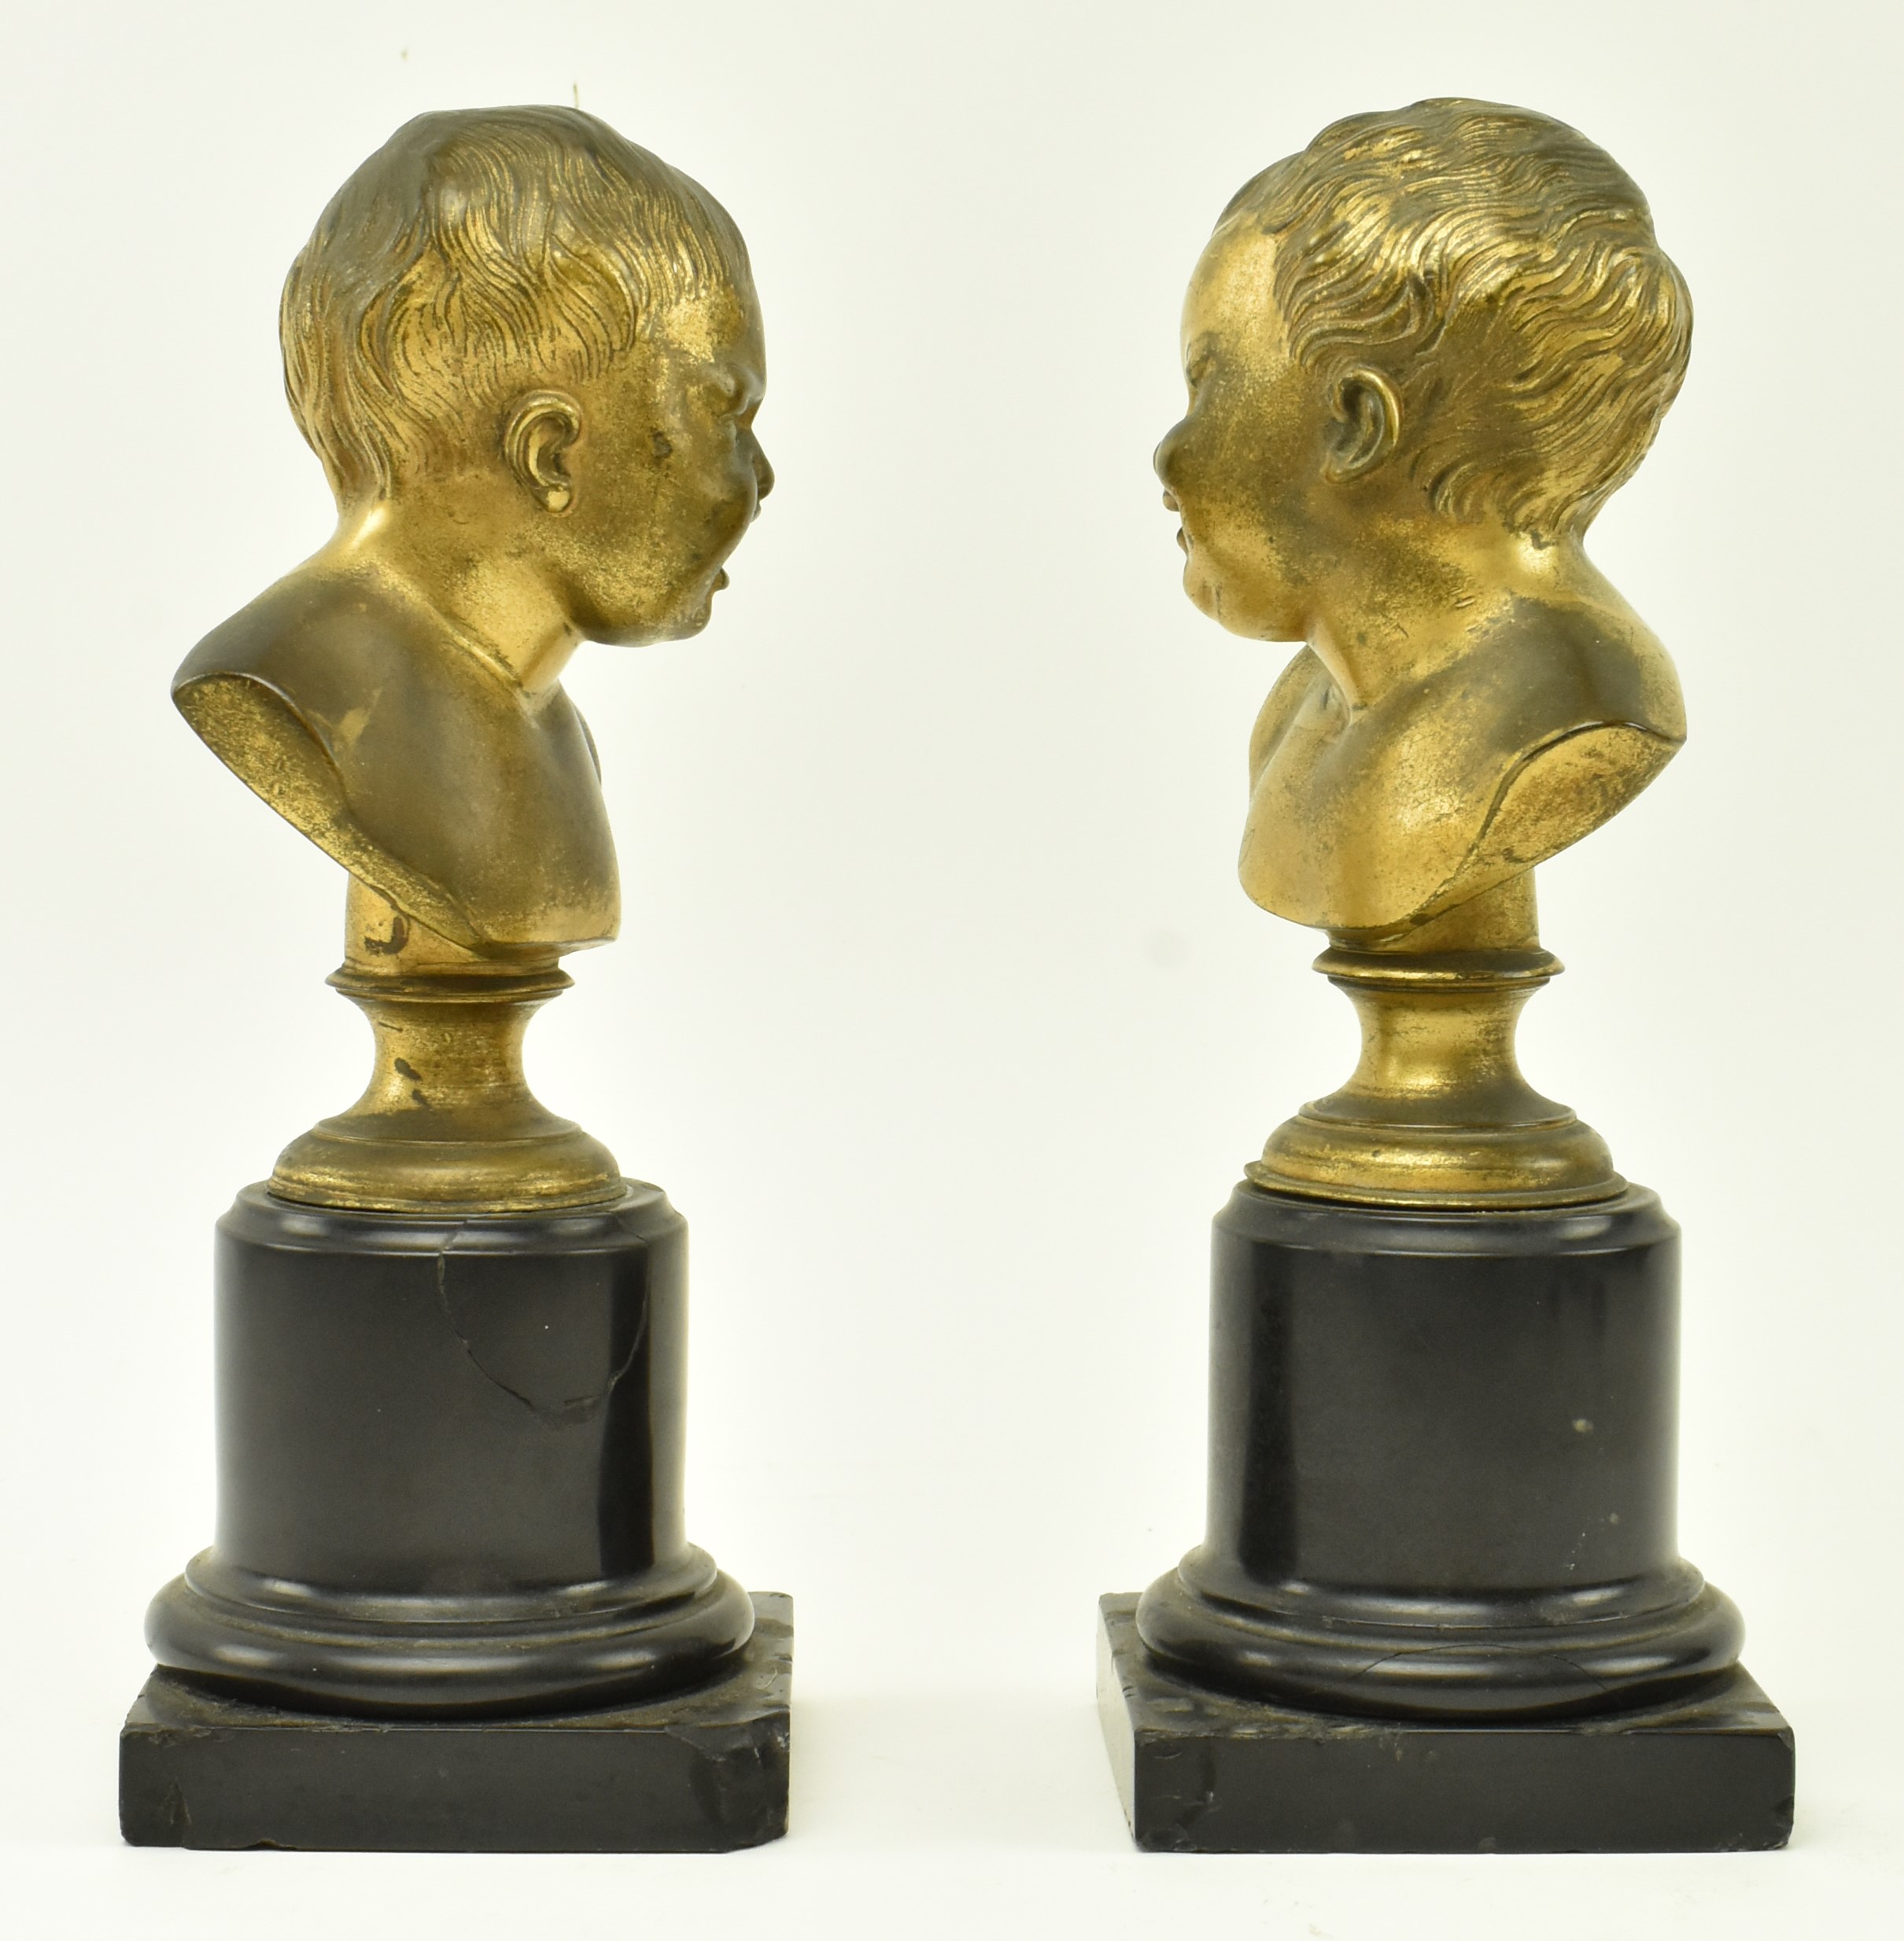 PAIR OF VICTORIAN 19TH CENTURY BRONZE CRYING INFANT BUSTS - Image 2 of 7